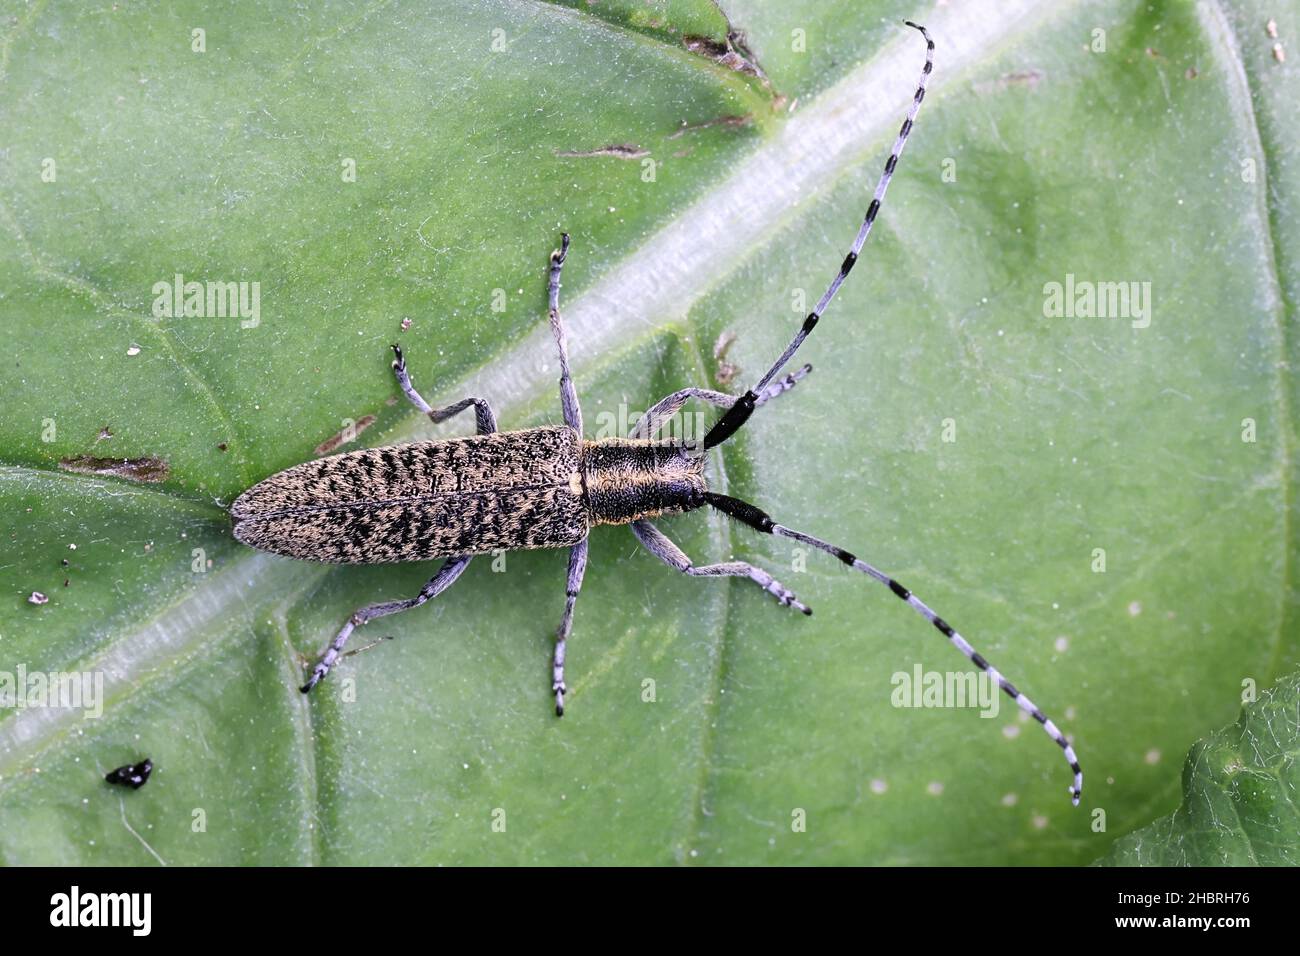 Agapanthia villosoviridescens, known as the golden-bloomed grey longhorn beetle, insect from Finland Stock Photo